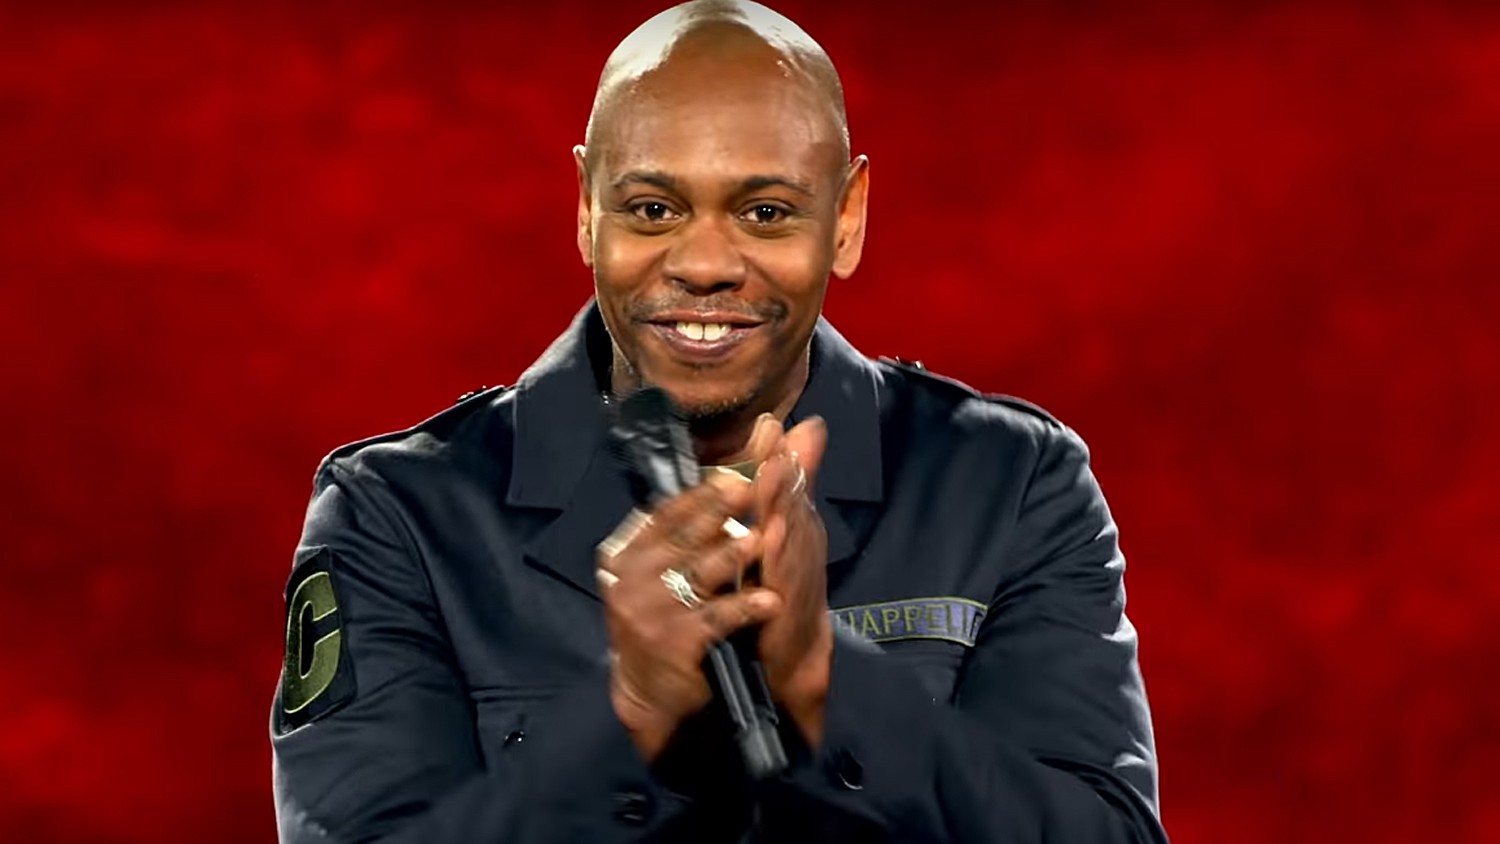 Dave Chappelle Announces A Crazy Number Of New Netflix Comedy Specials.